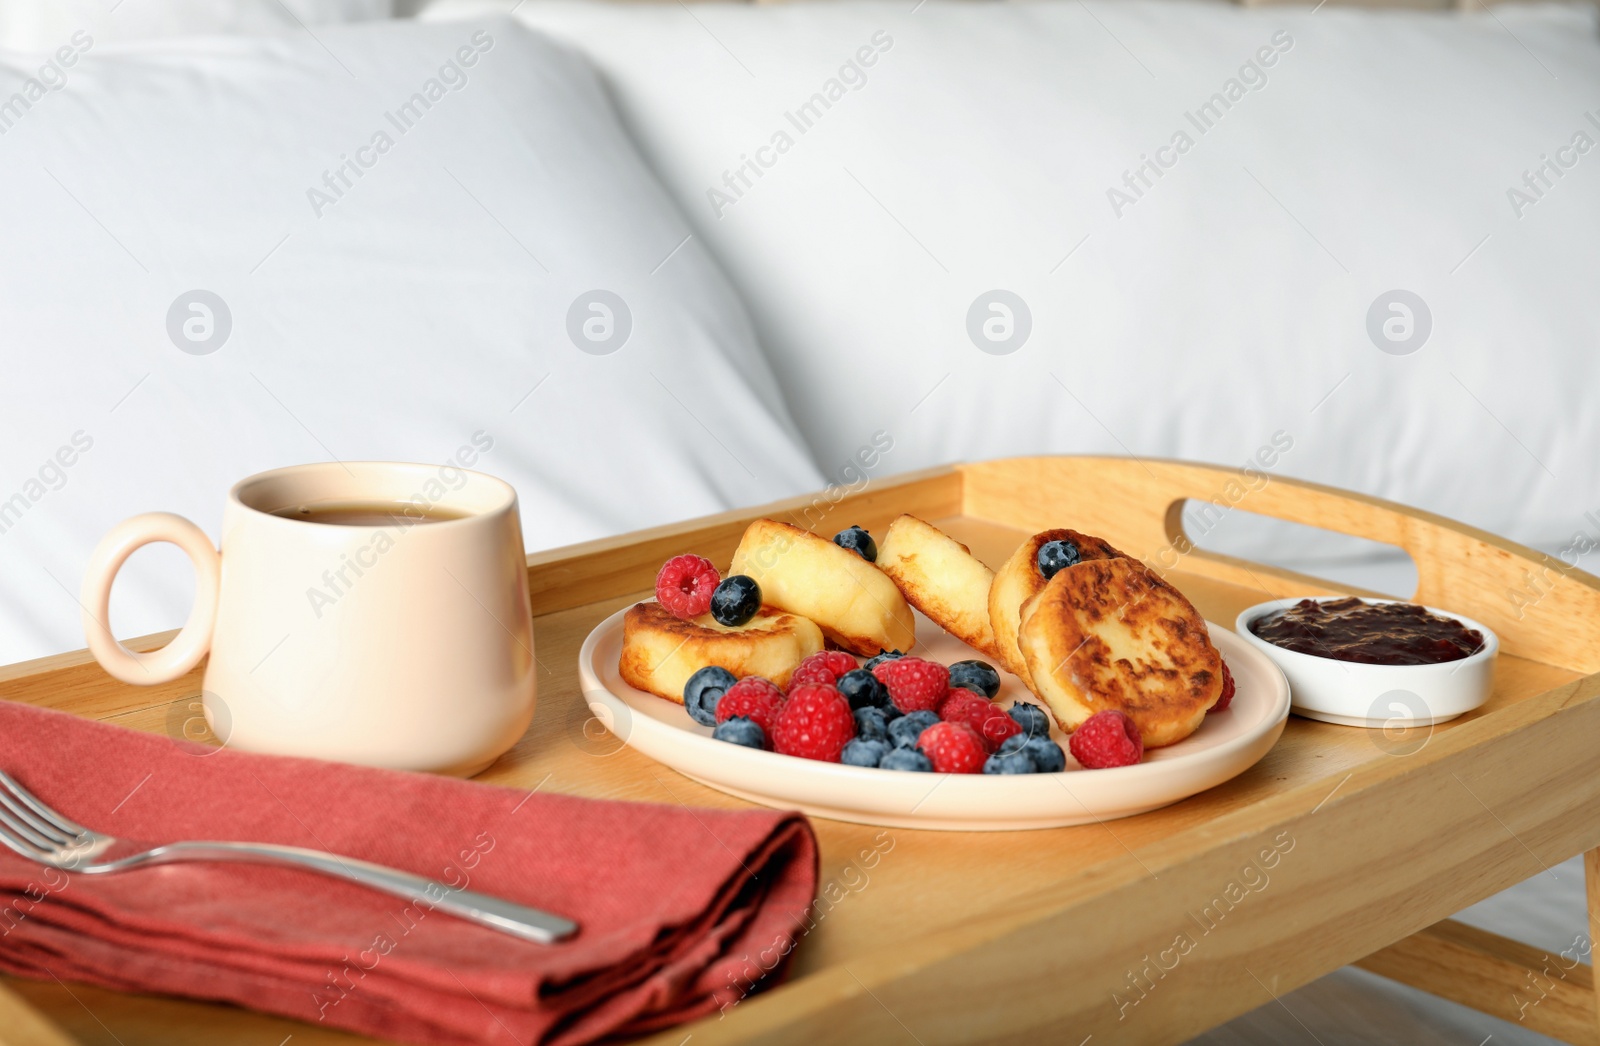 Photo of Tasty breakfast served in bedroom. Cottage cheese pancakes with fresh berries and coffee on wooden tray